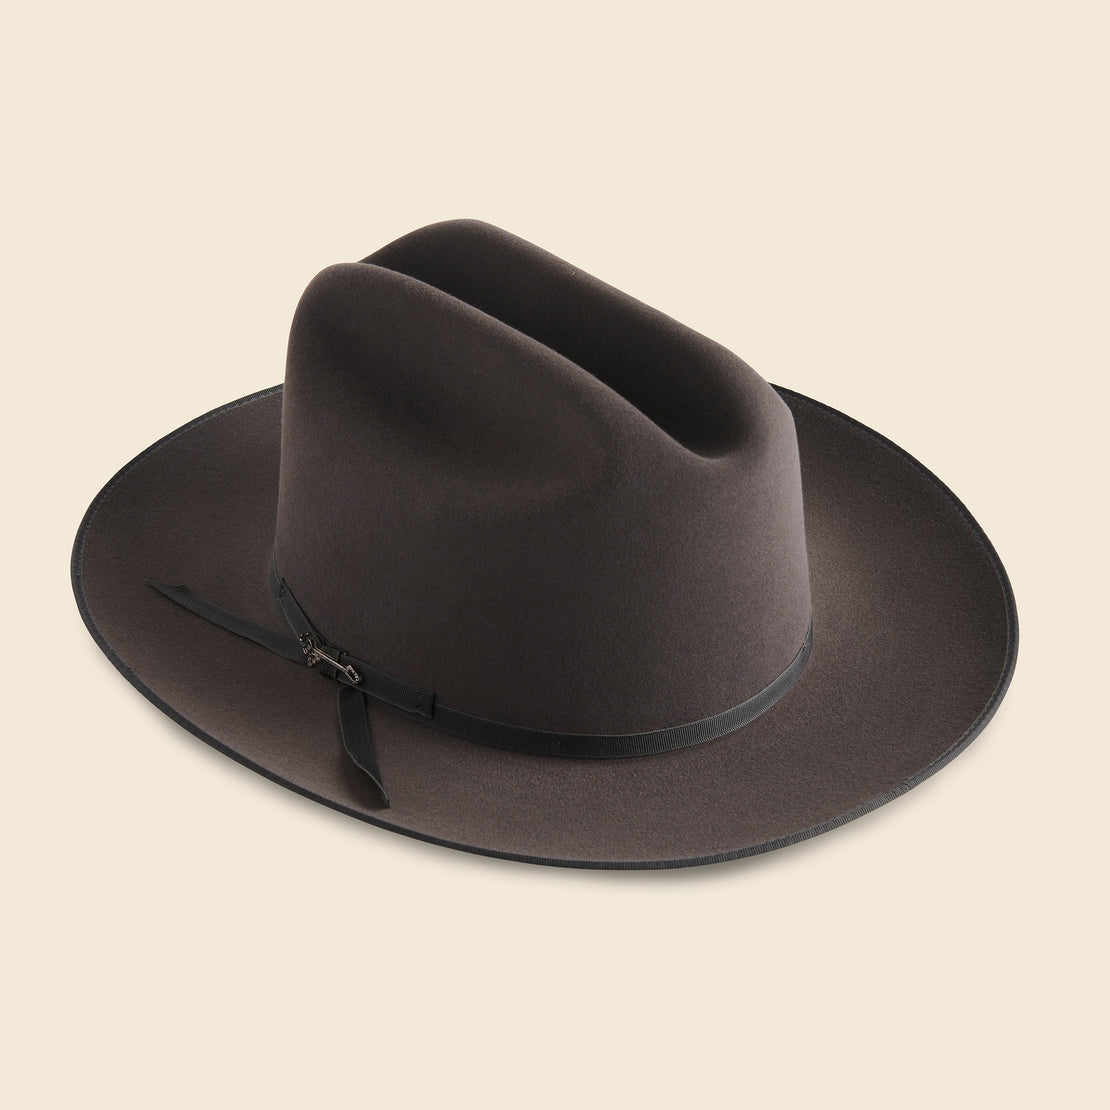 Stetson Royal Deluxe Open Road Hat - Caribou